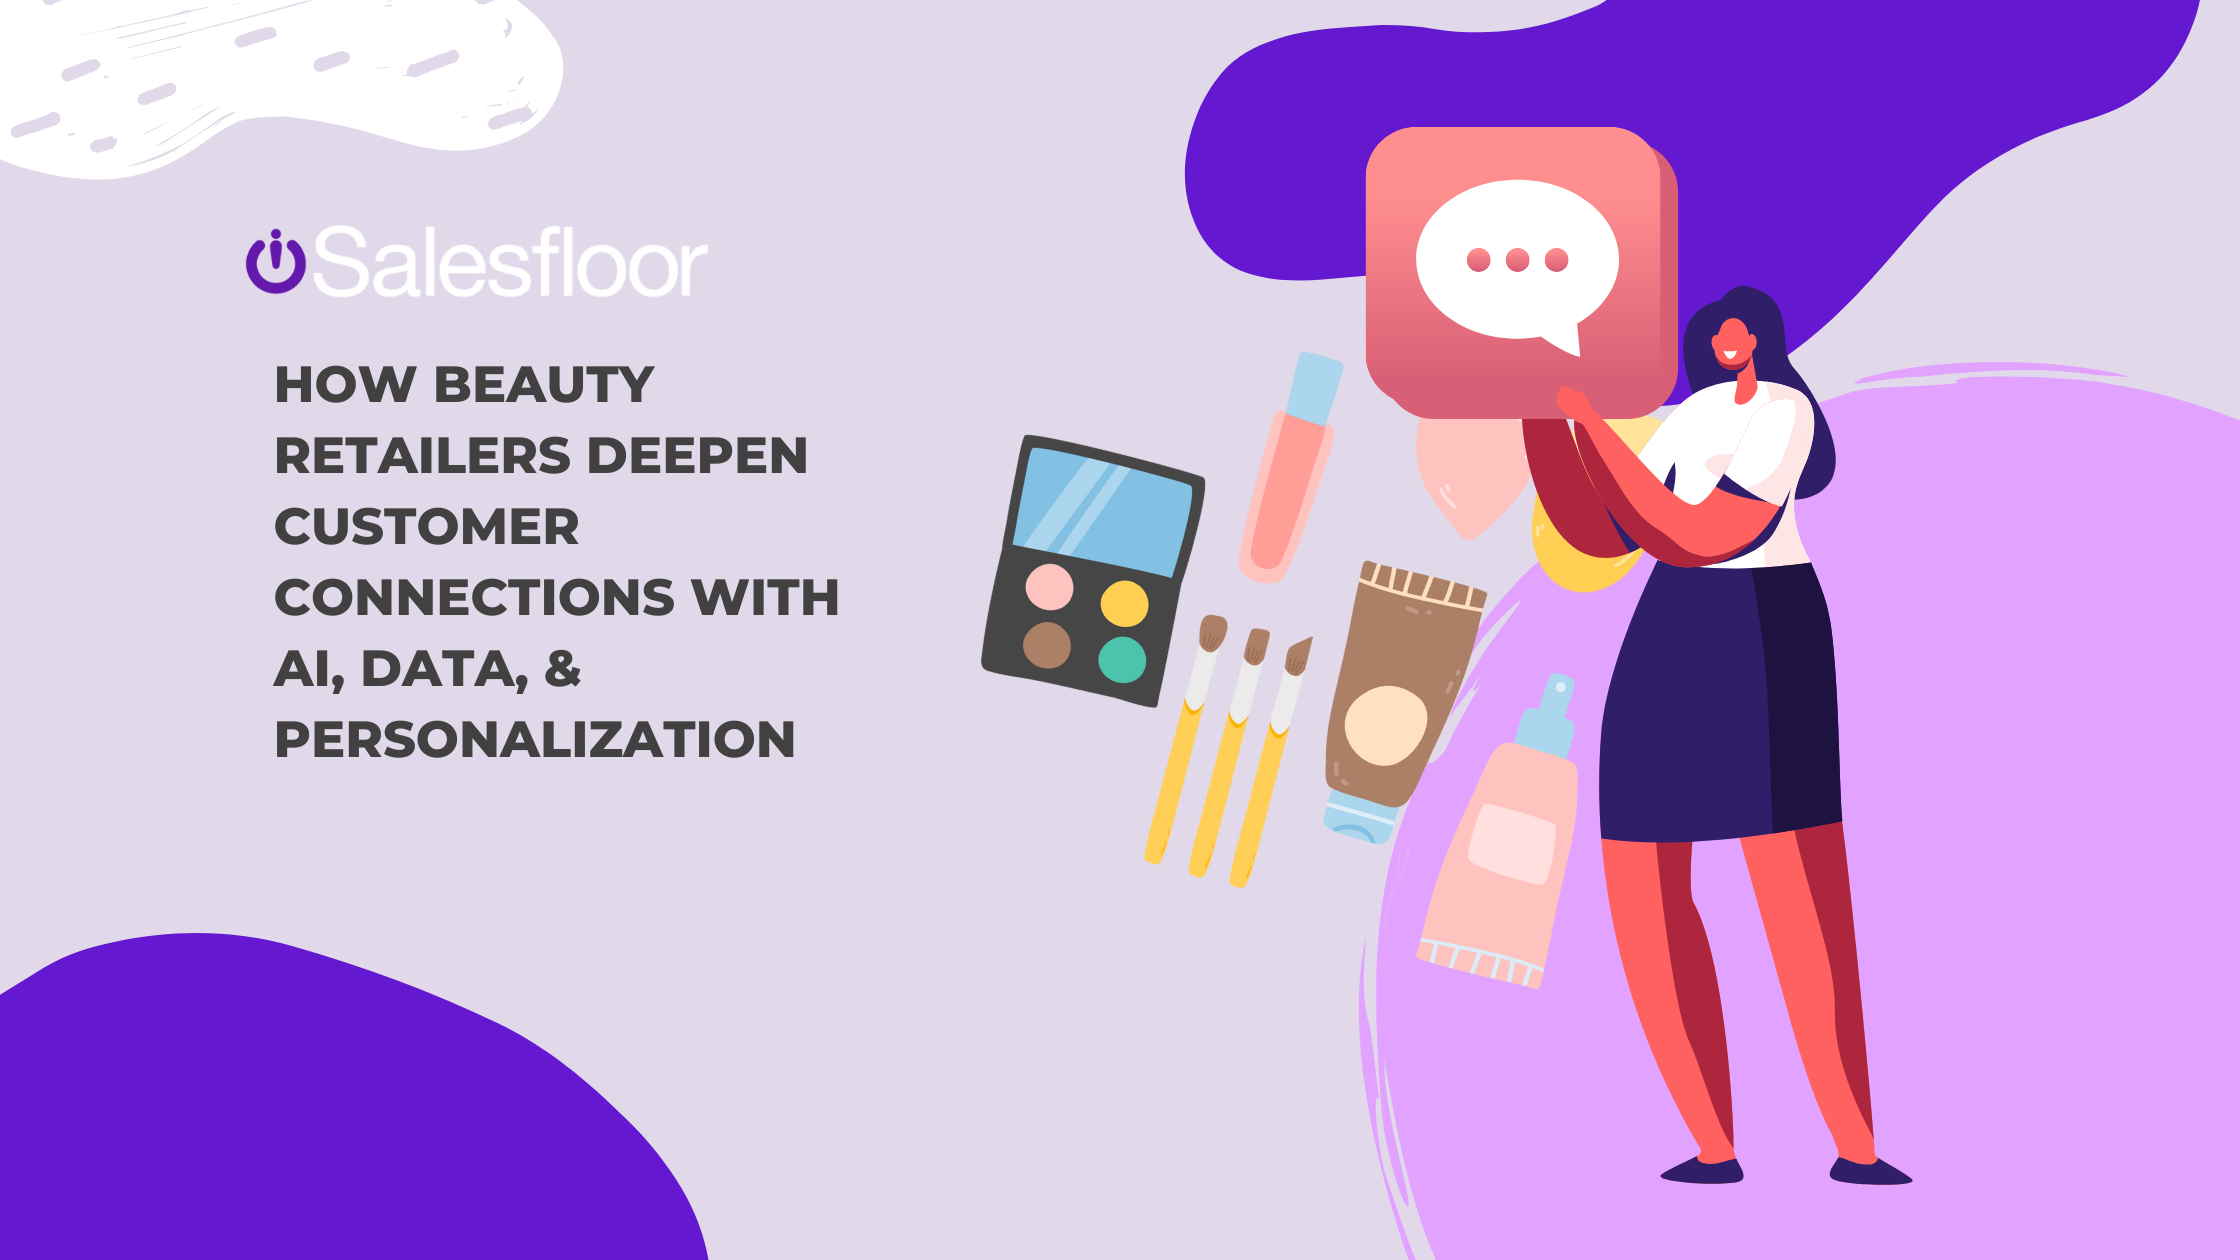 How Beauty Retailers Deepen Customer Connections with AI, Data, & Personalization